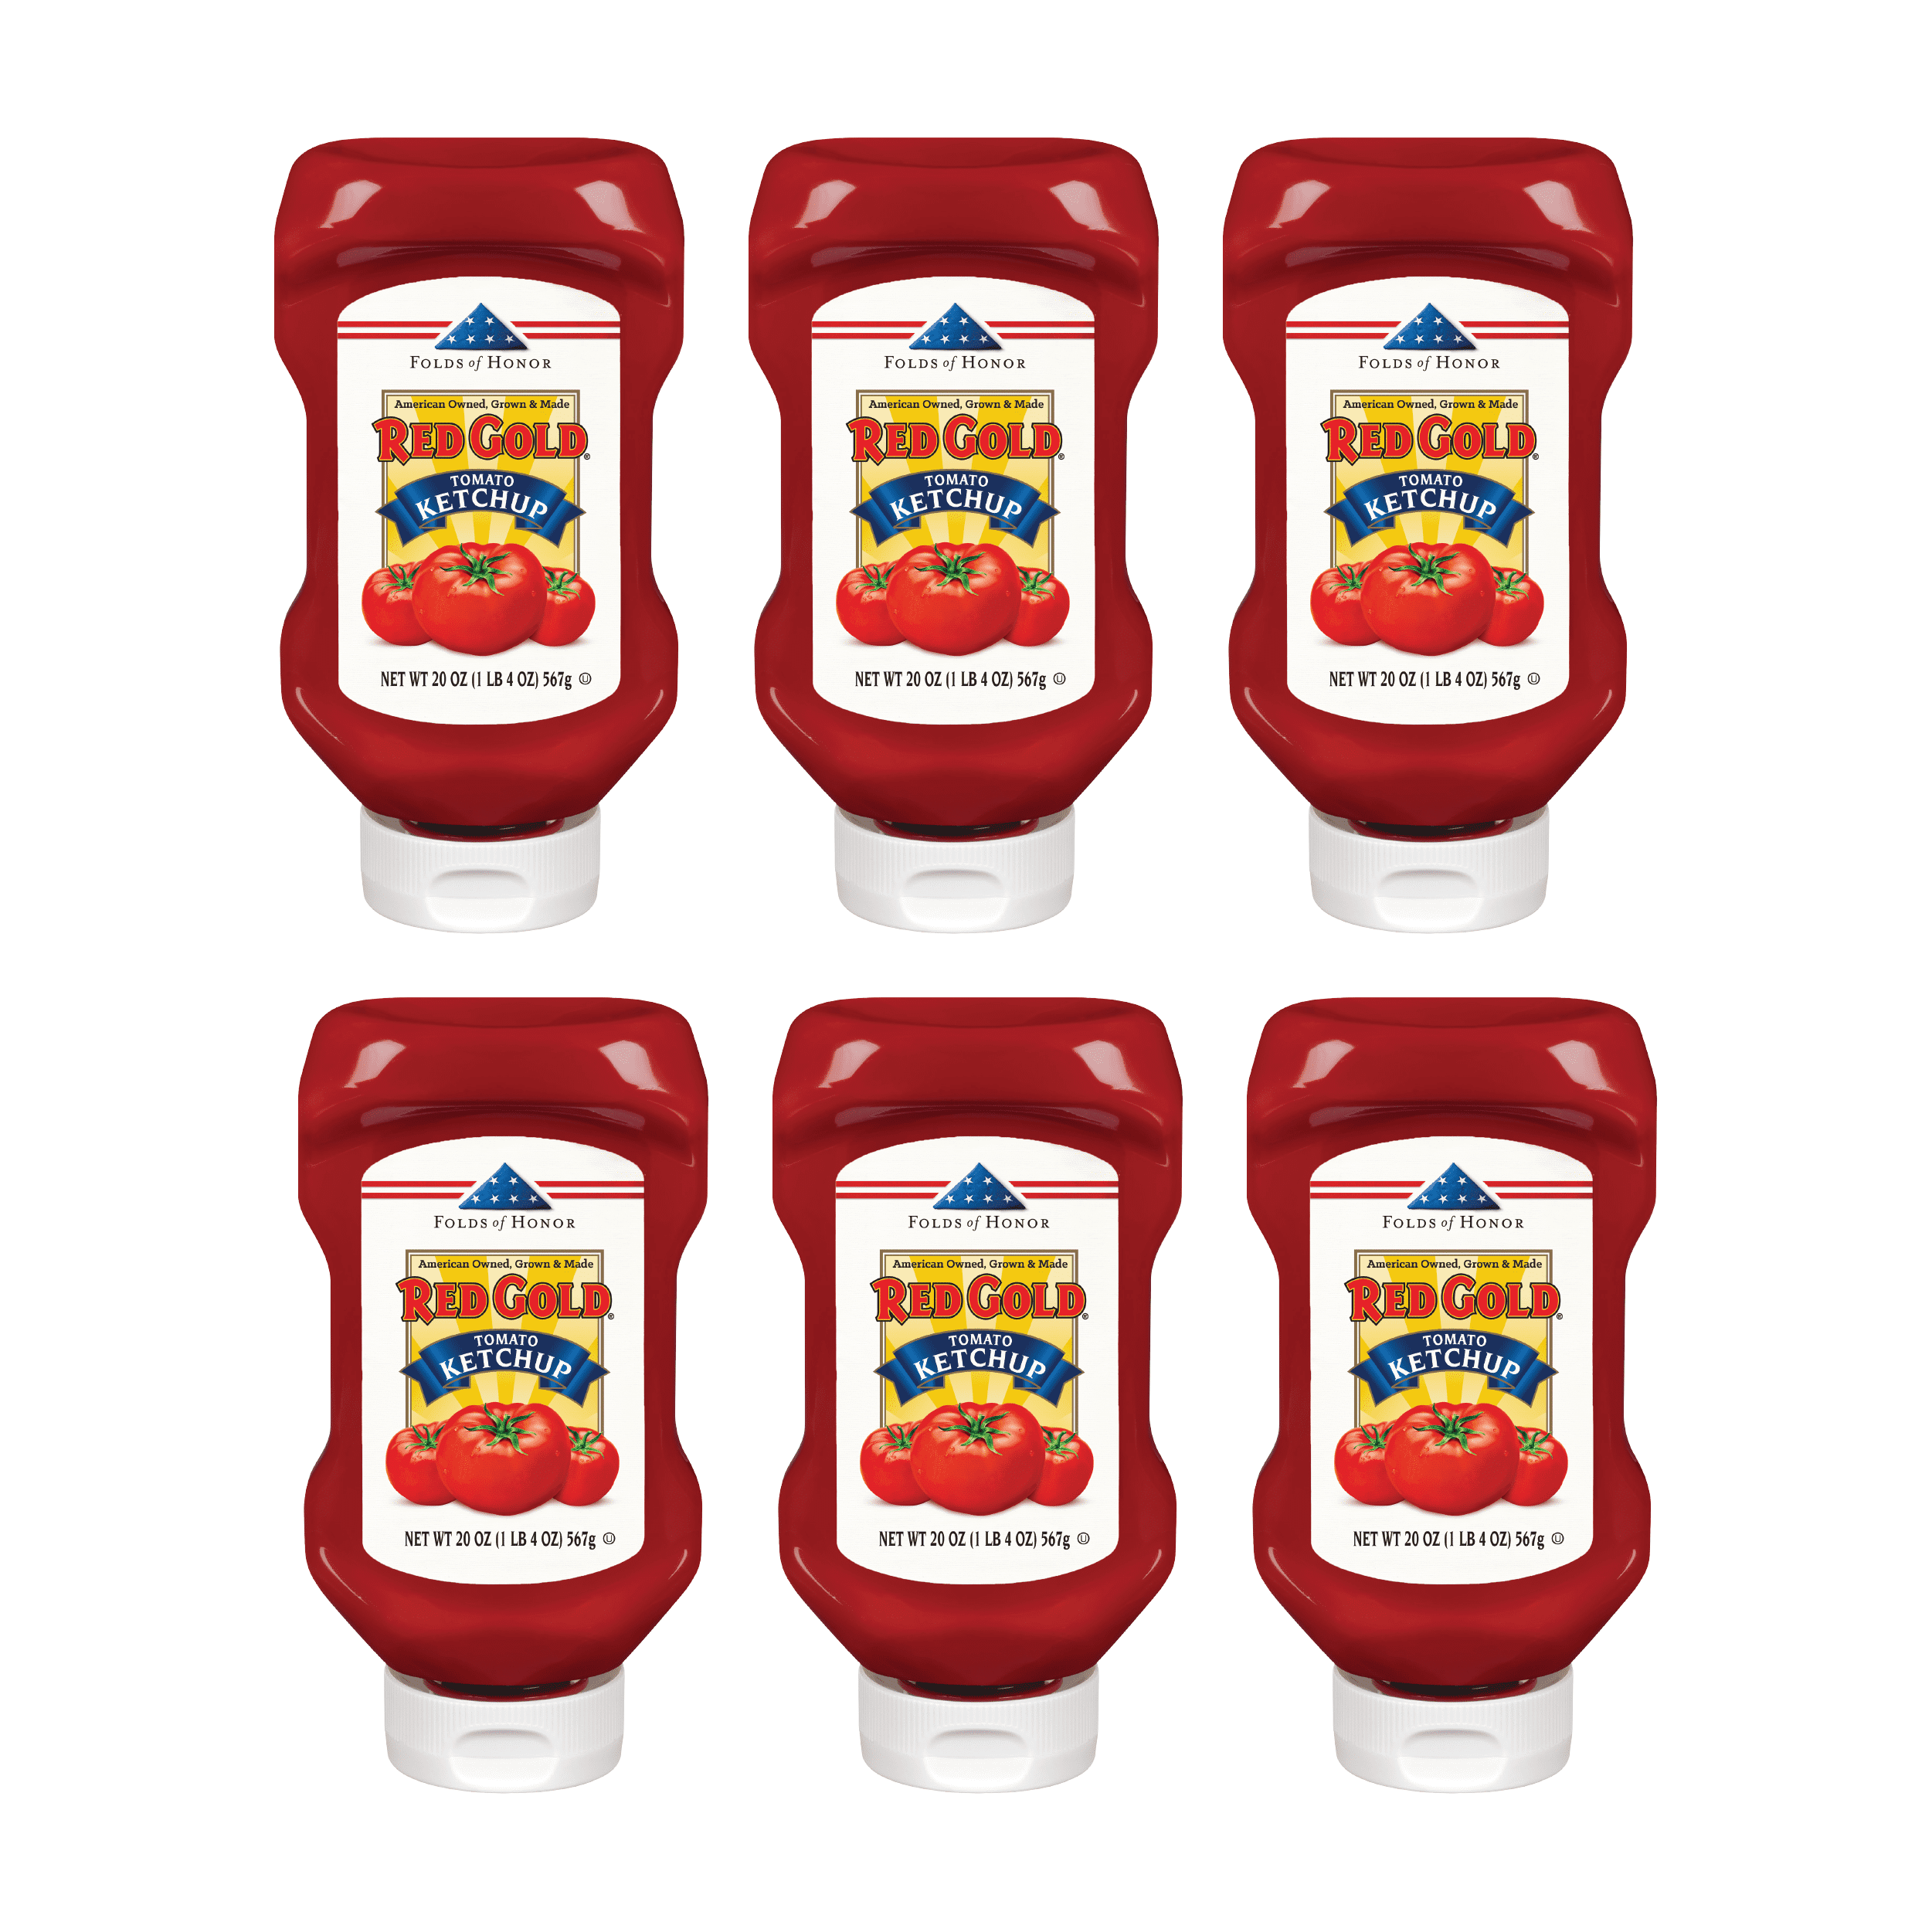 Red Gold® Tomato Ketchup 32 oz. Bottle